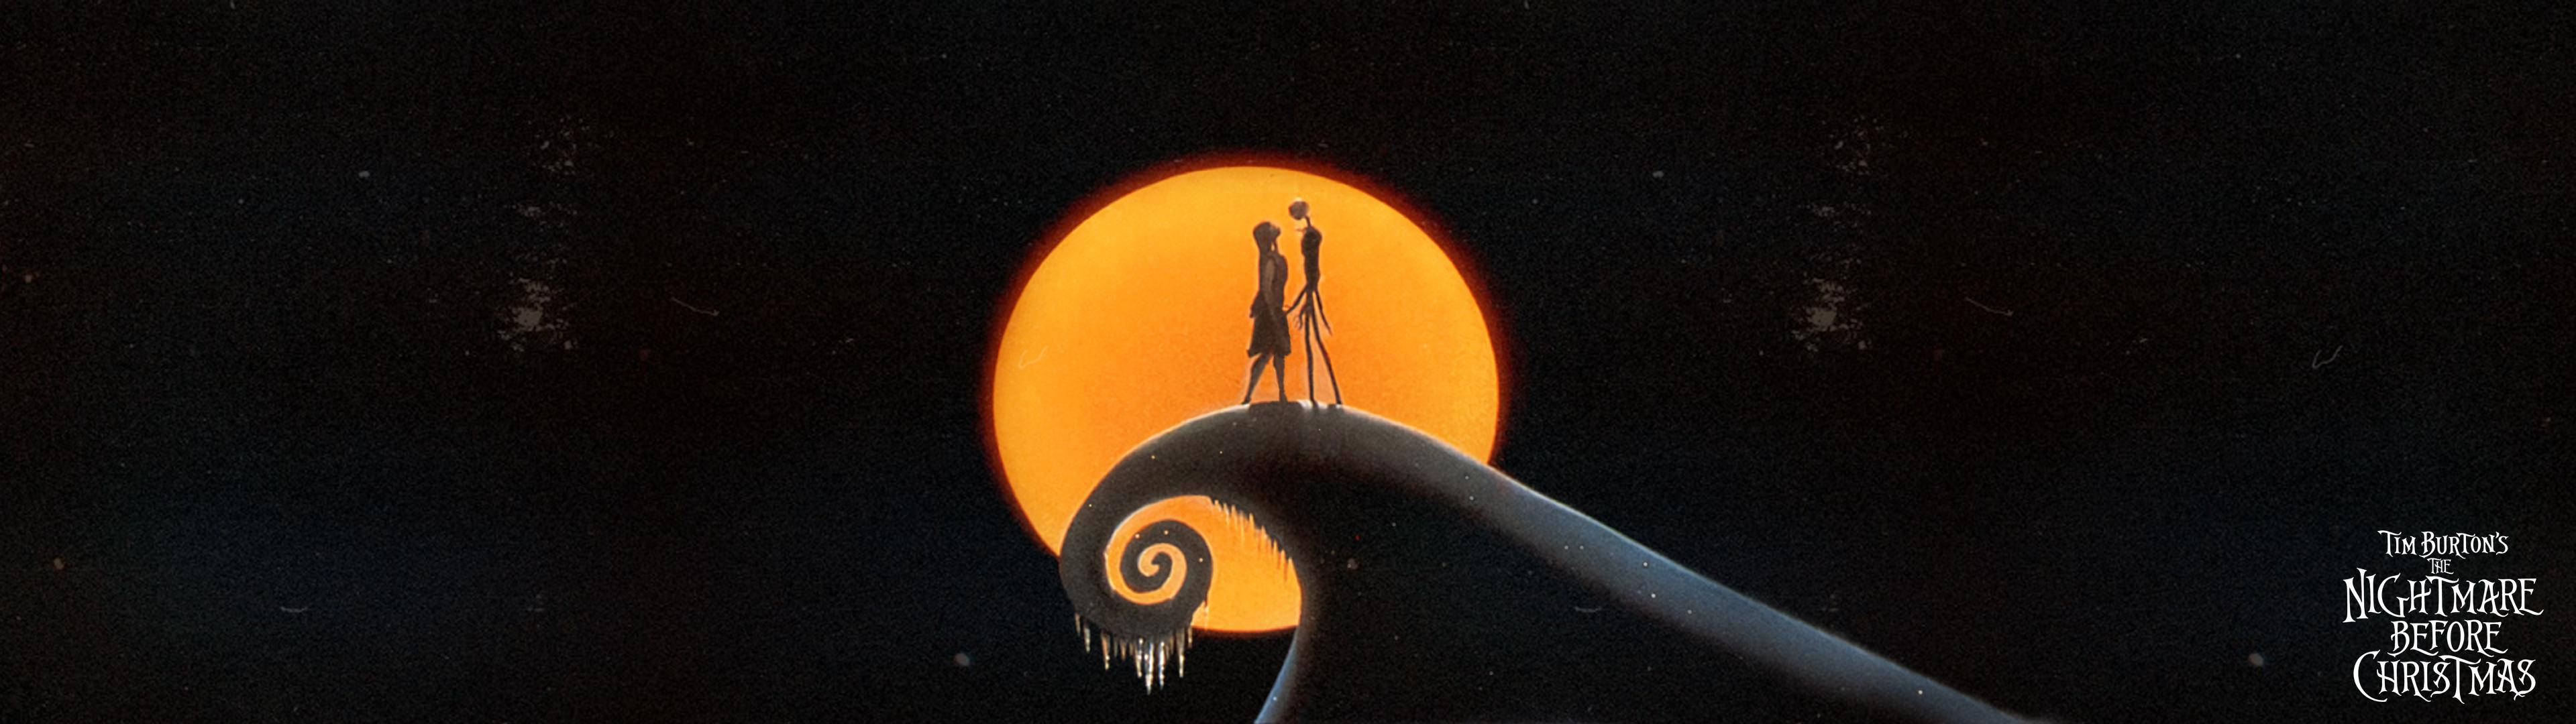 Nightmare Before Christmas 3840X1080 Wallpaper and Background Image